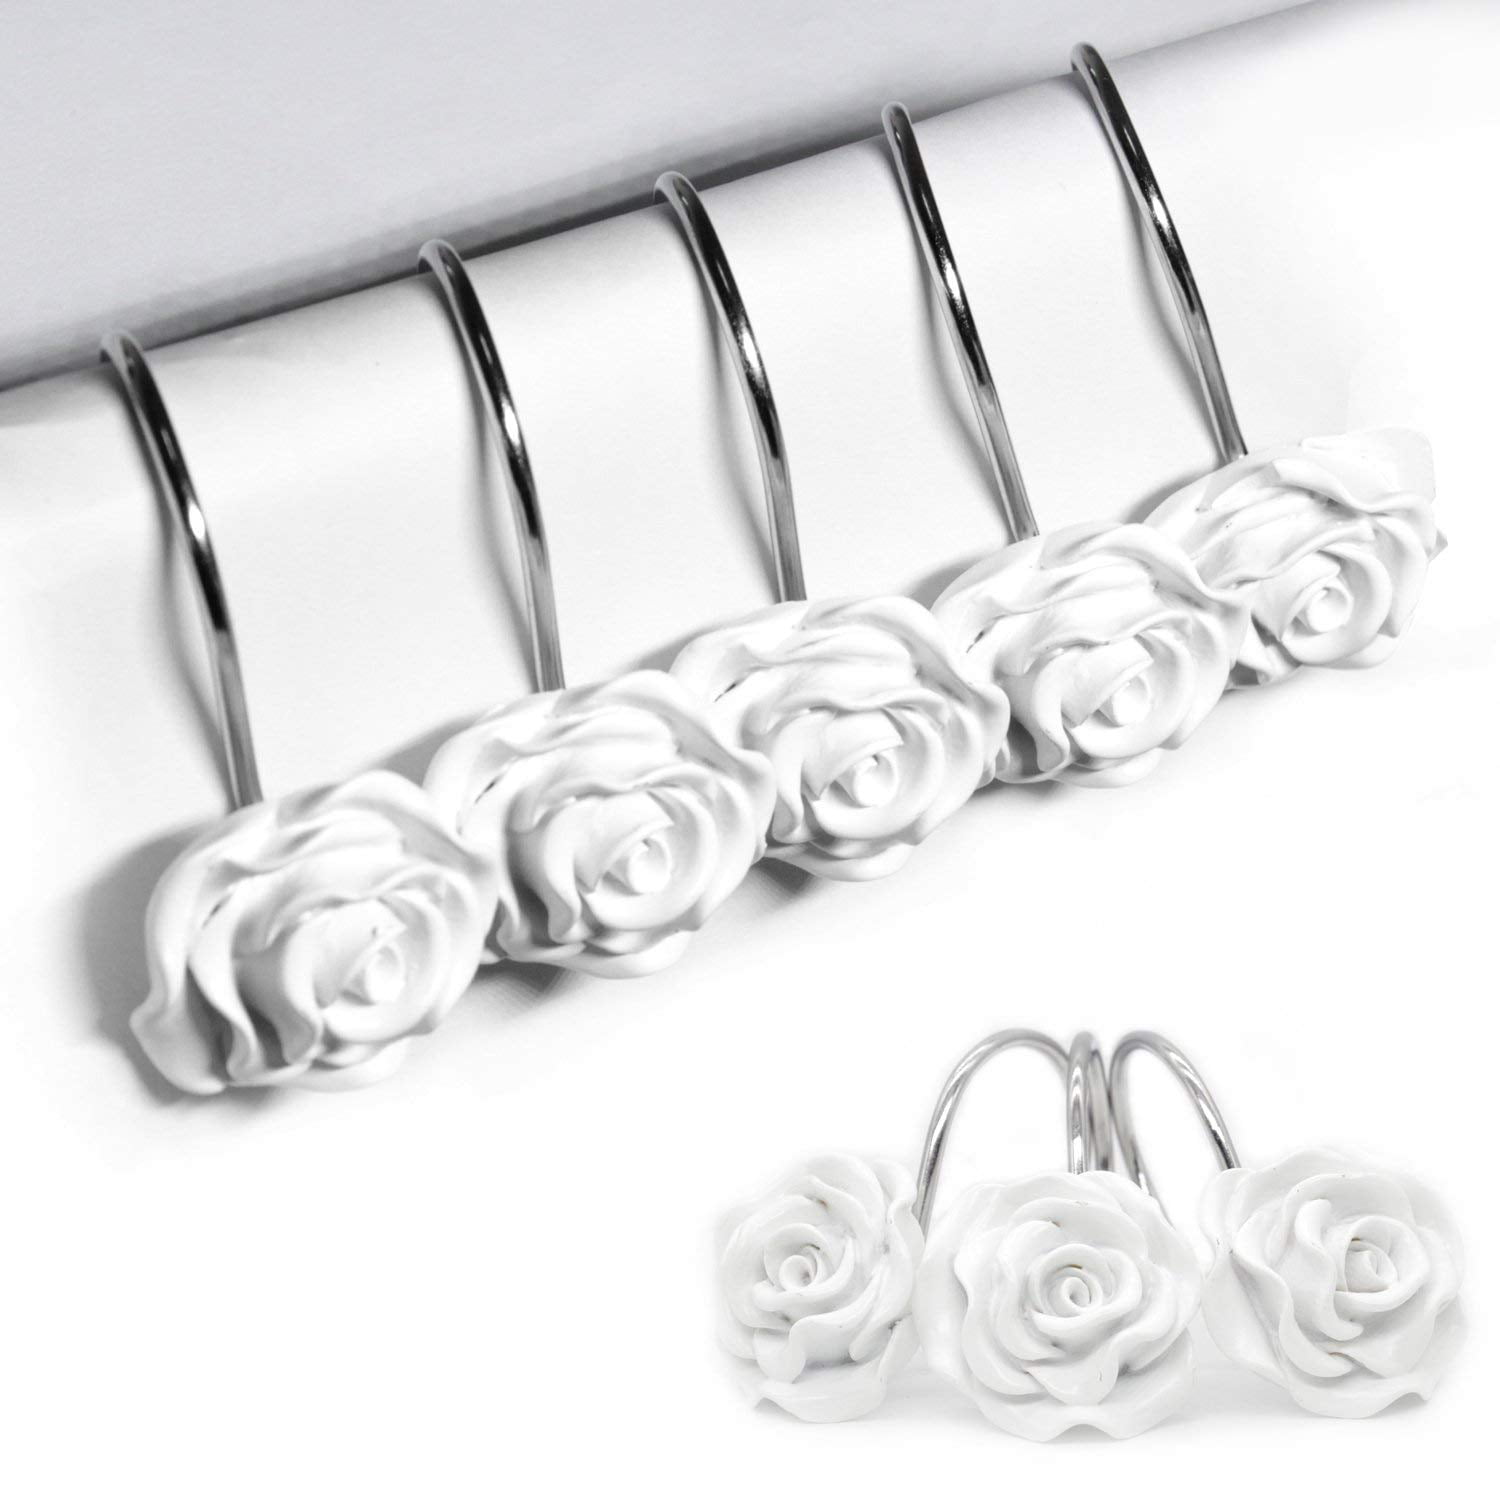 Rose Flower Resin Floral Rolling Shower Curtain Hooks Home Supplies Hot Sale H 